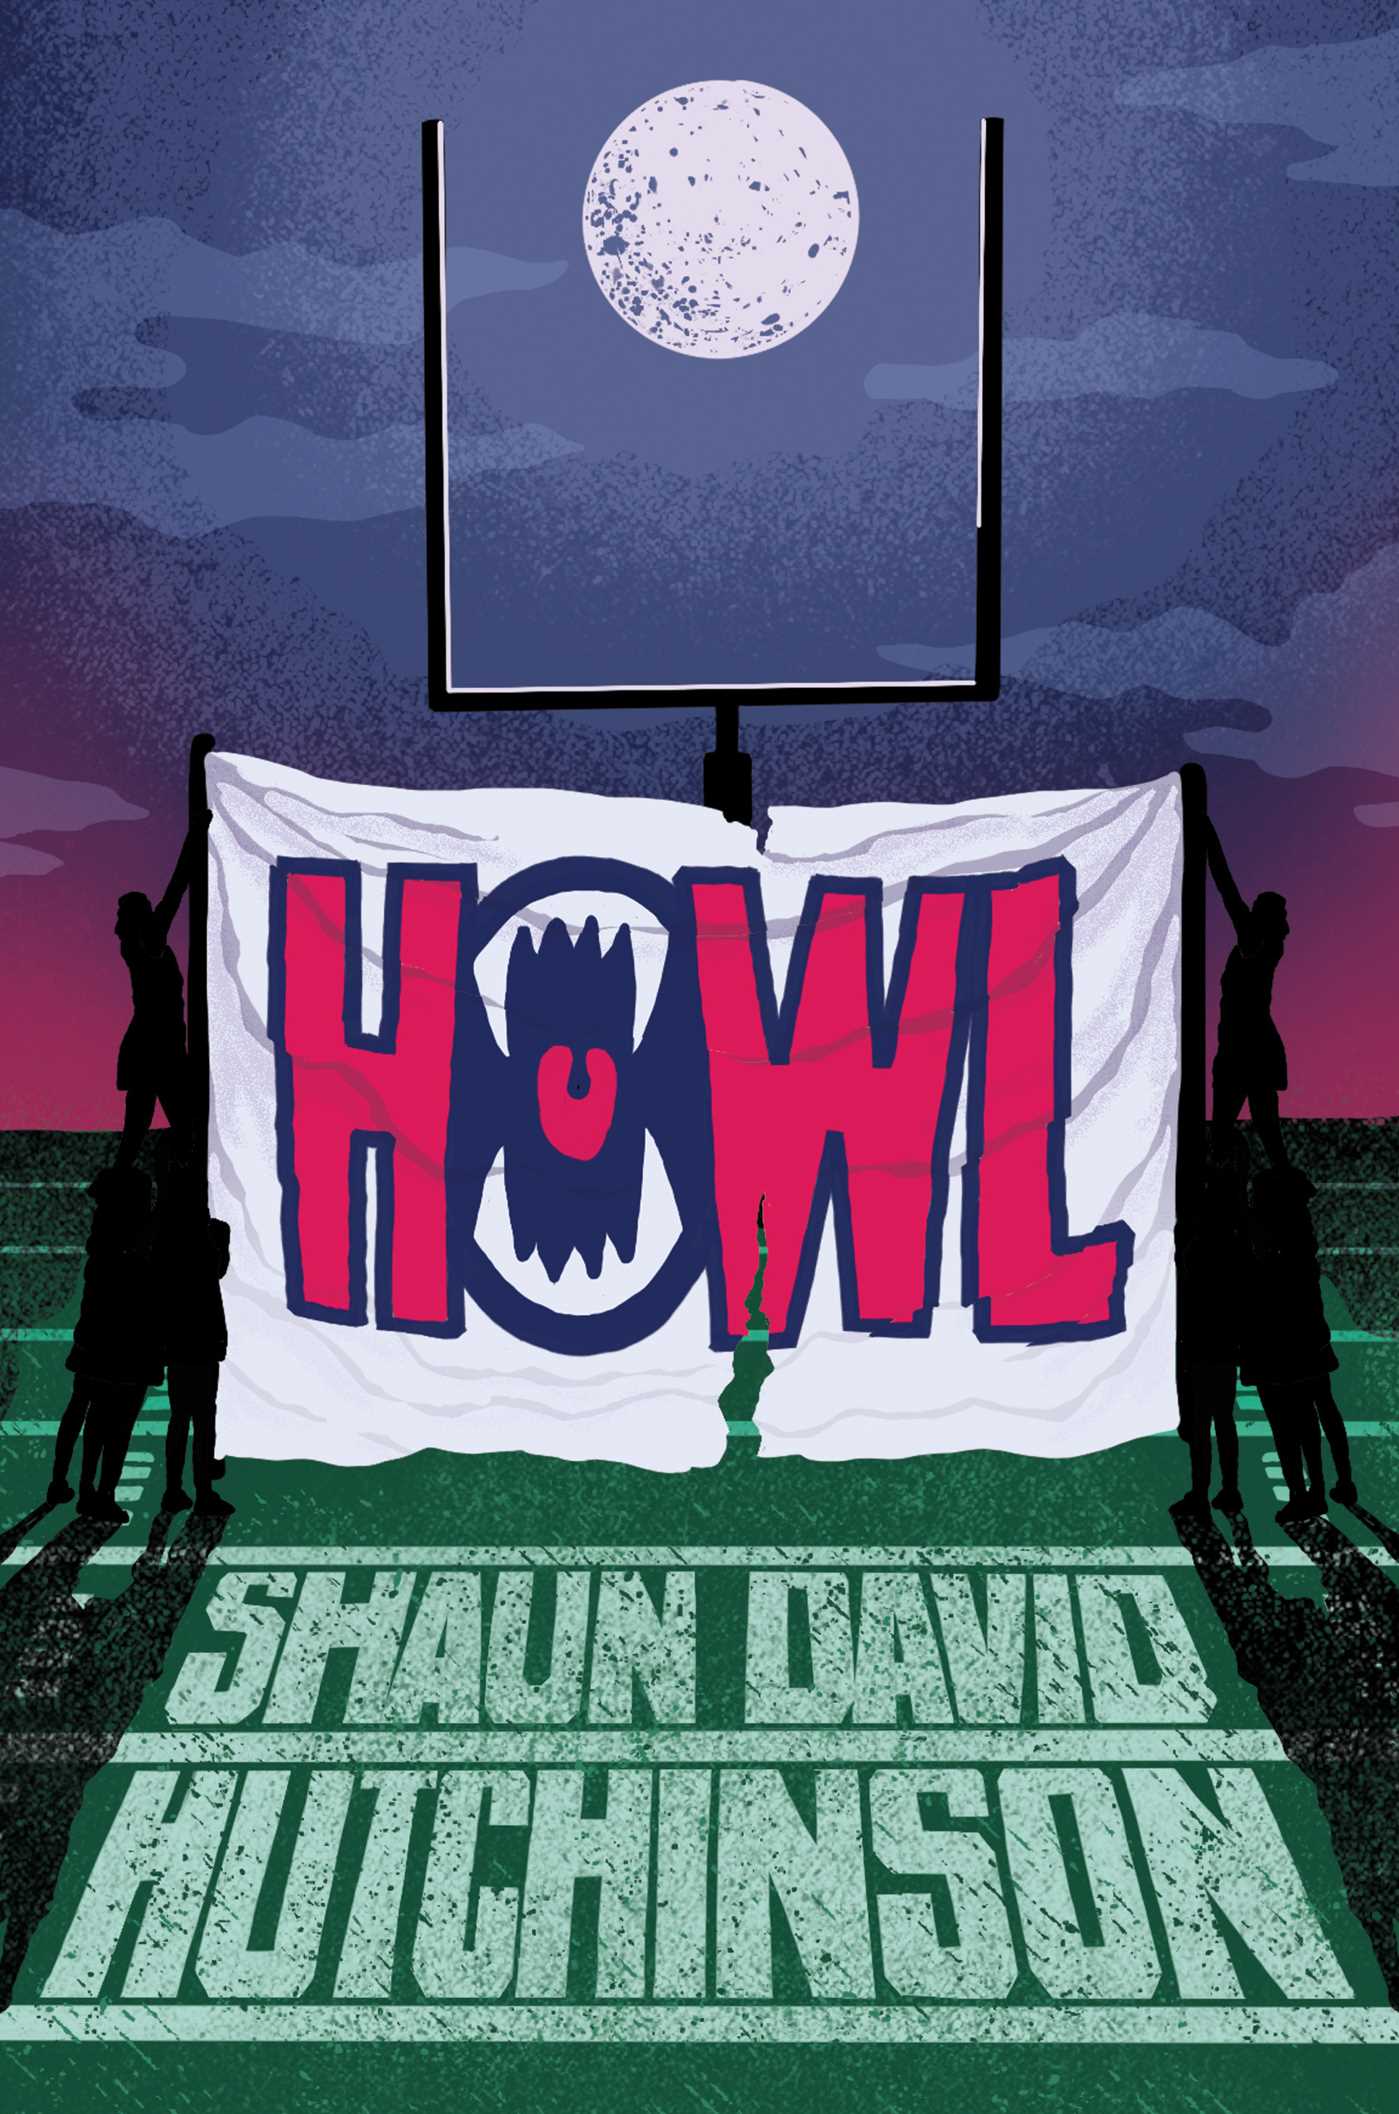 Image for "Howl"